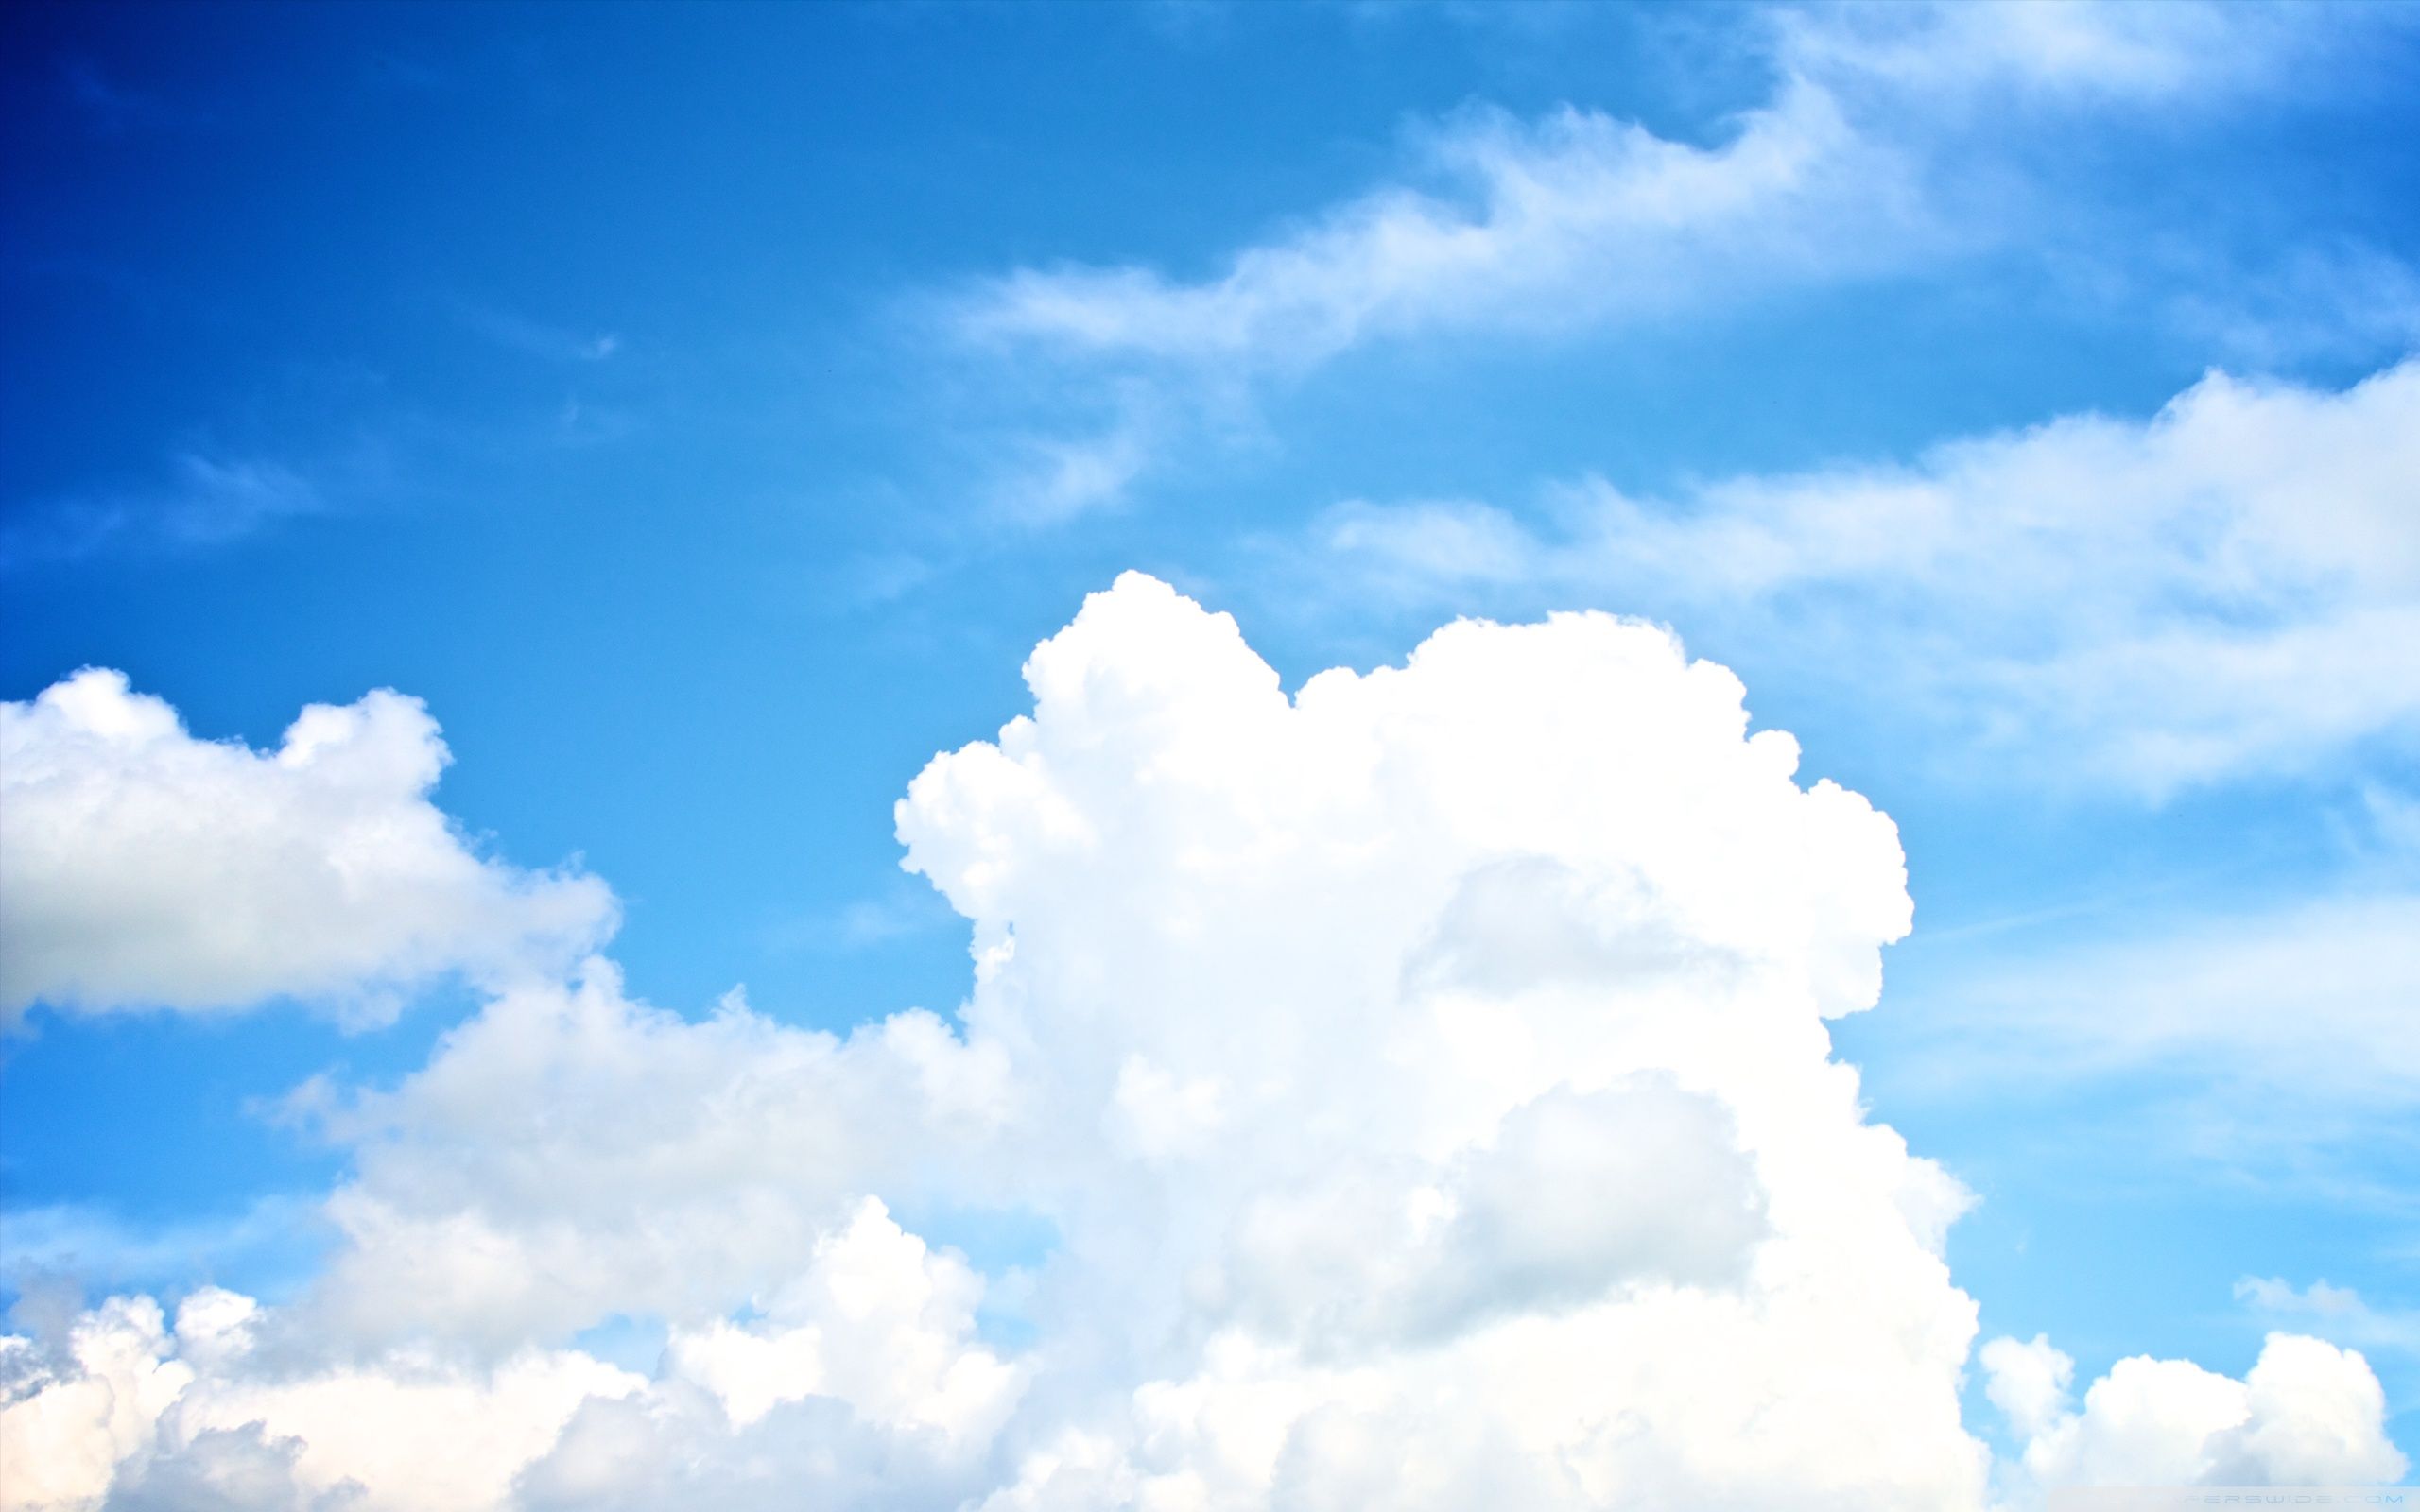 Blue Sky With Clouds Wallpaper